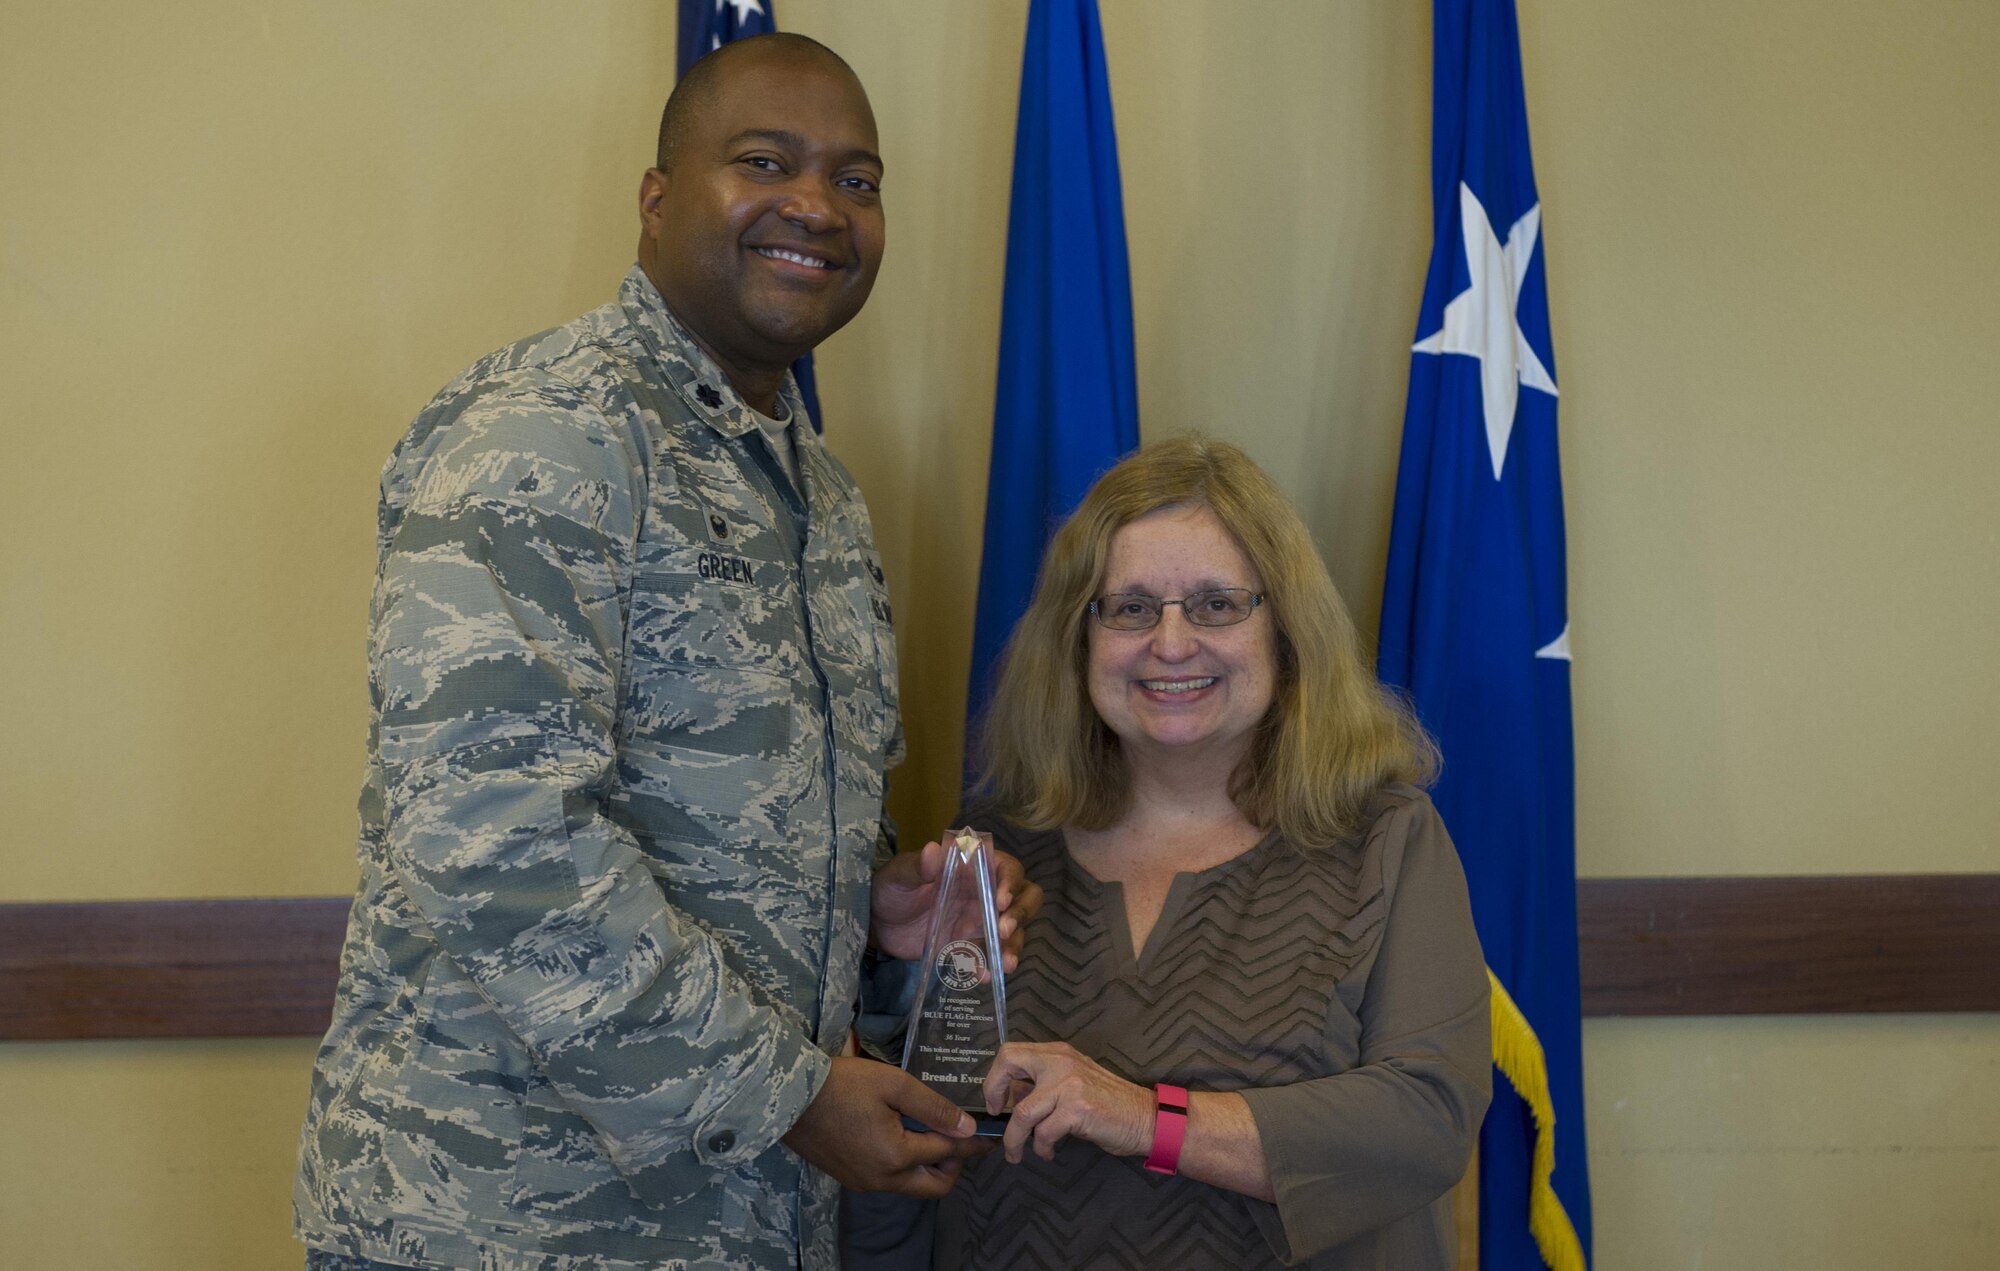 Lt. Col. Merrick Green, left, commander of the 505th Combat Training Squadron, presents Brenda Every, a systems analyst with the 505th CTS, with an award during the Blue Flag exercise 40th anniversary luncheon at Hurlburt Field, Fla., Dec. 13, 2016. Every has served and contributed to Blue Flag exercises for more than 36 years. (U.S. Air Force photo by Airman 1st Class Joseph Pick)